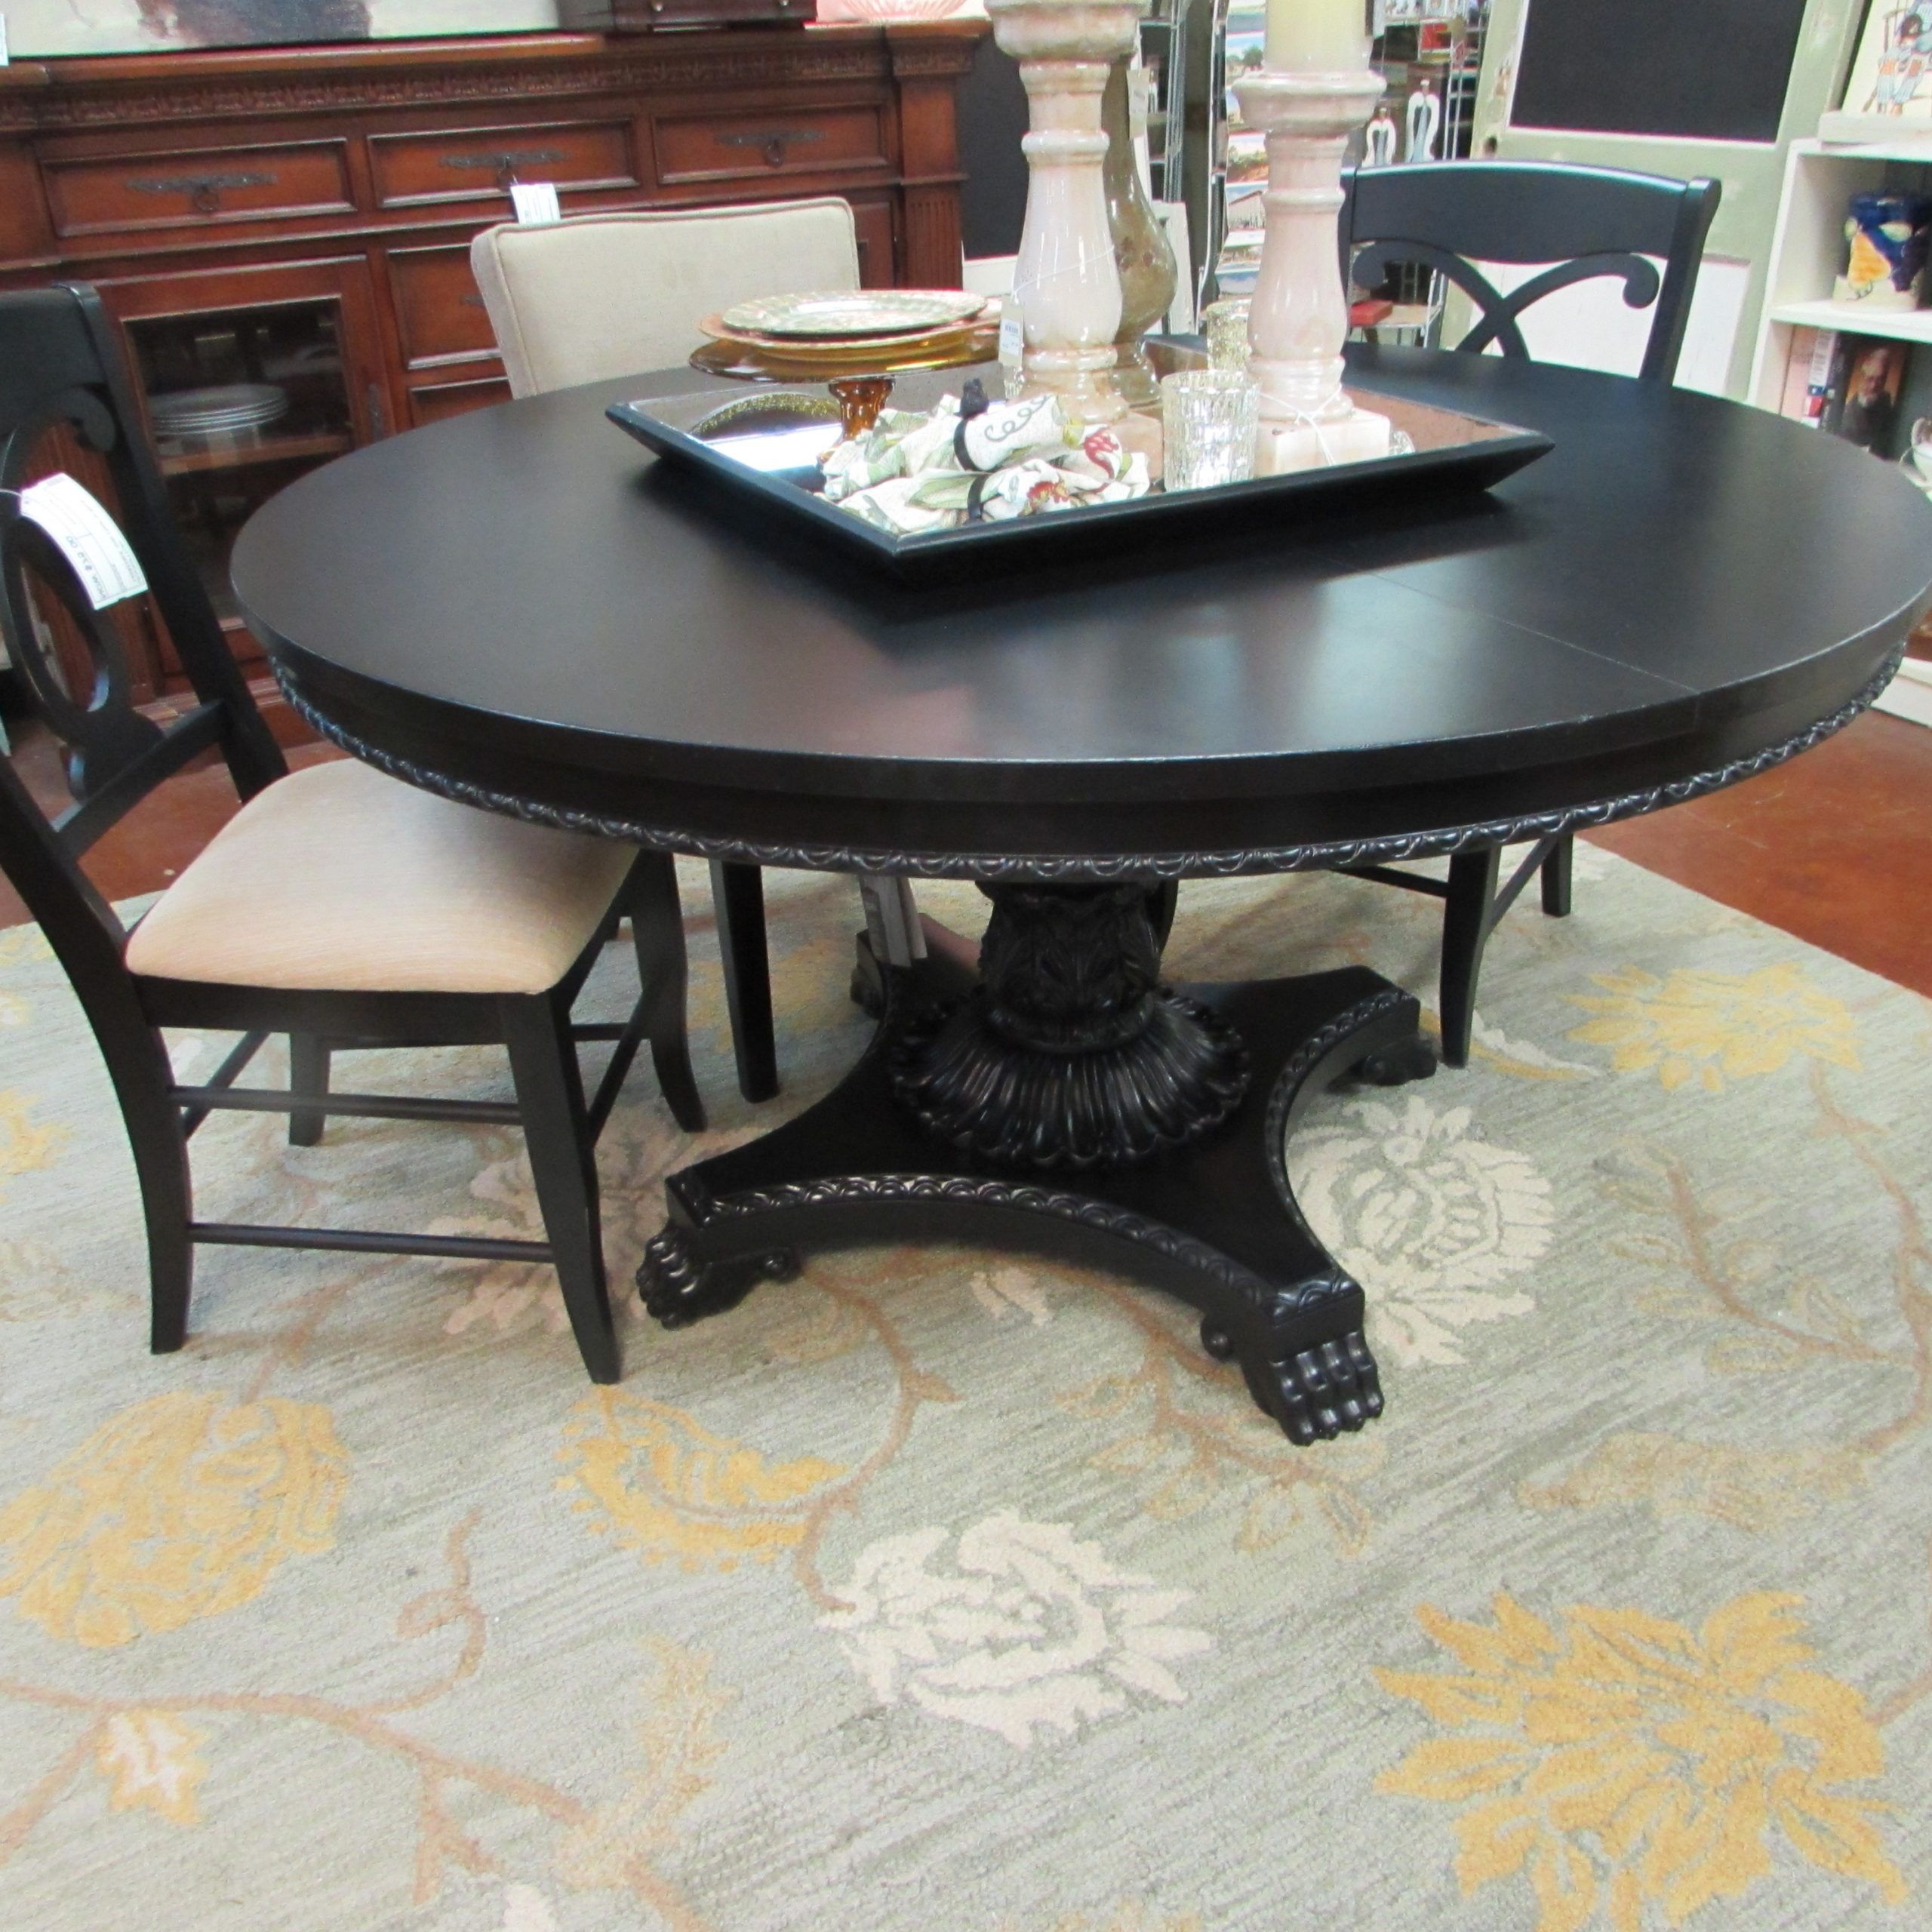 Serrato Pedestal Dining Tables Pertaining To Most Recently Released Restored Large Round Pedestal Dining Table On Awesome Base (View 6 of 20)